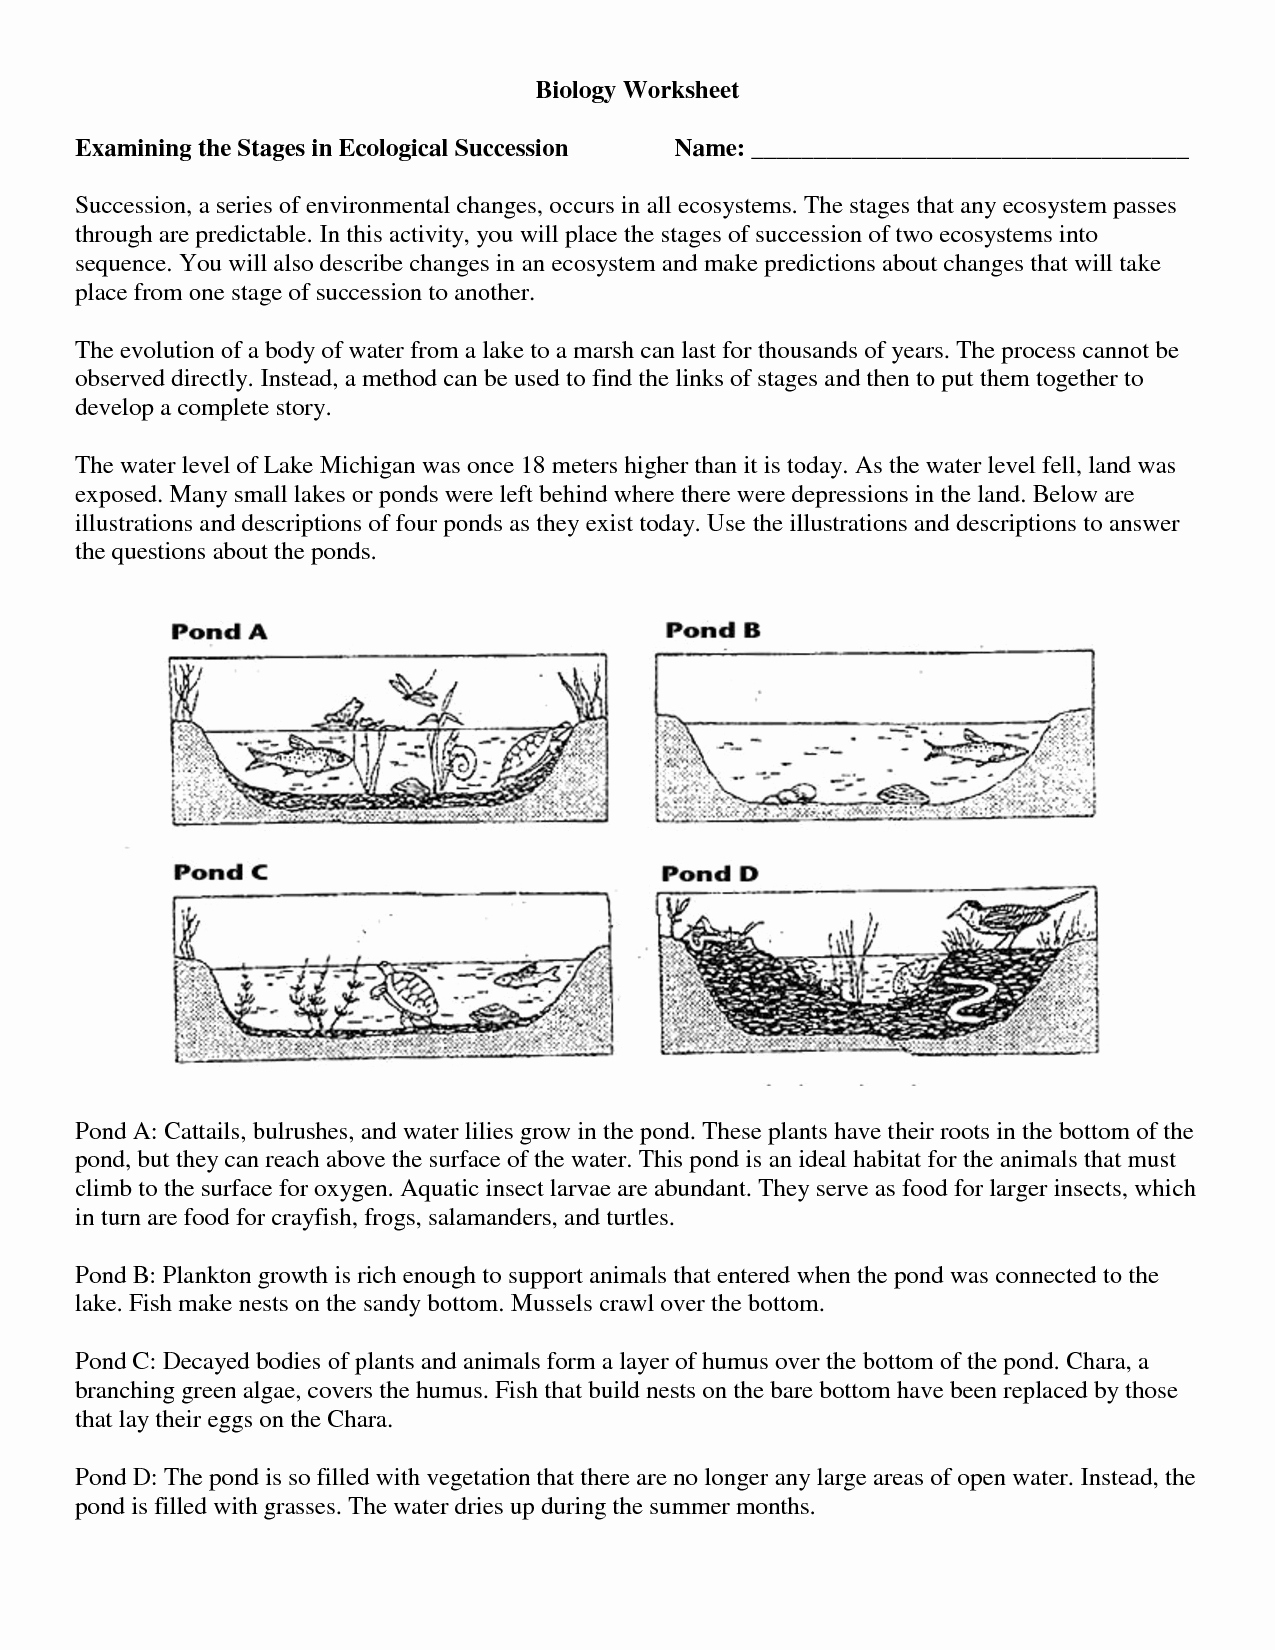 Ecological Succession Worksheet High School Luxury 11 Best Of Ecosystem Worksheets for Middle School